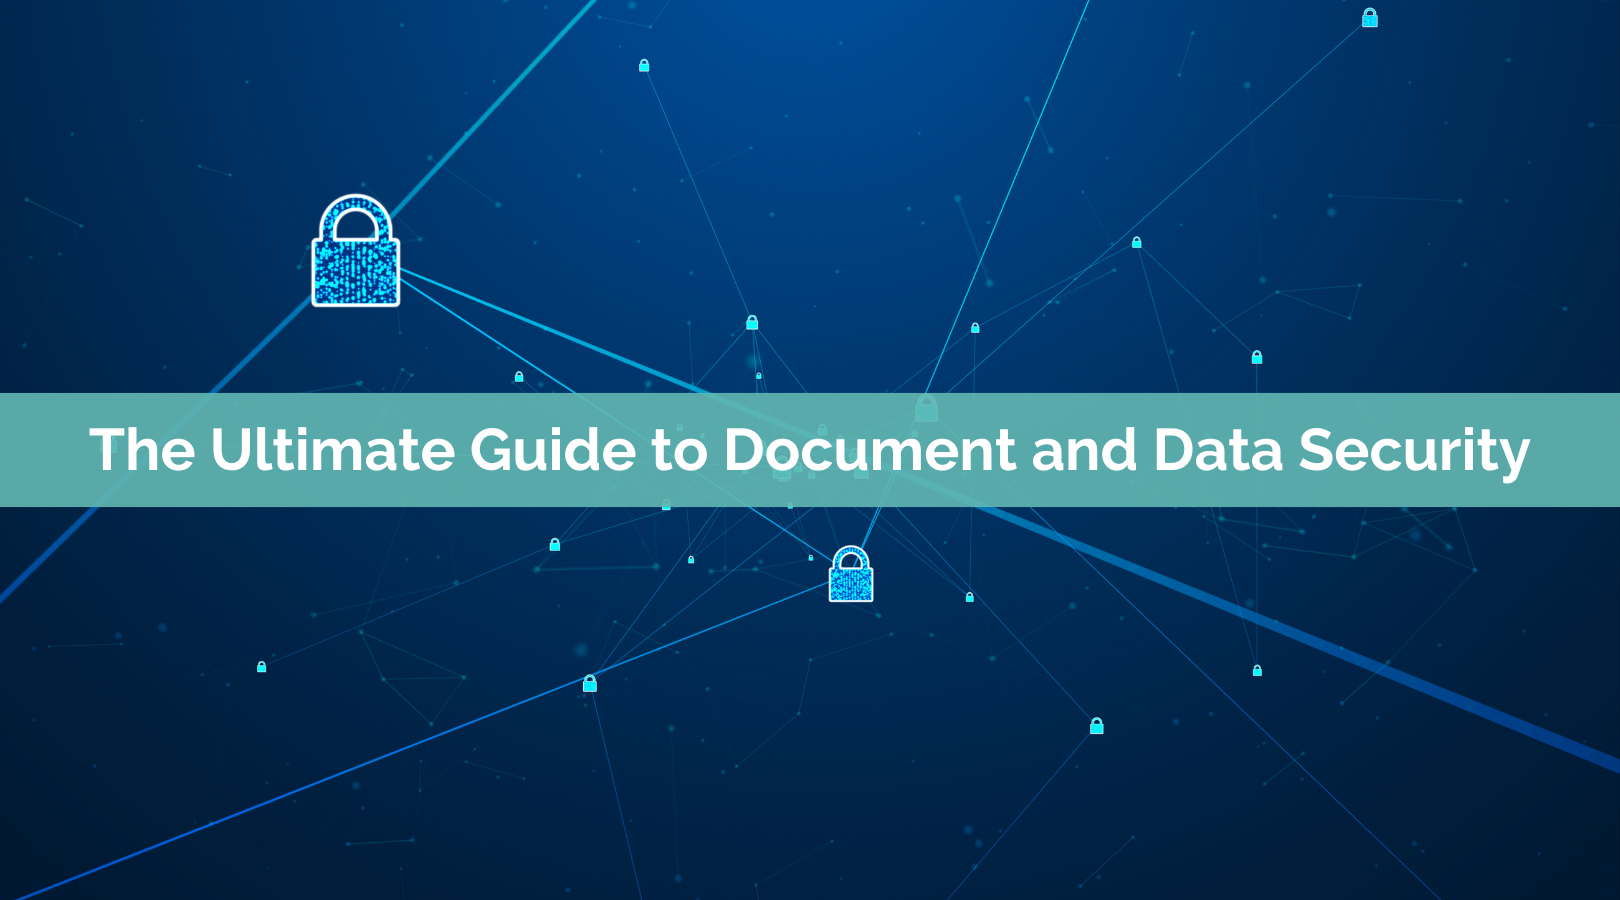 The Ultimate Guide to Document and Data Security: What to Know